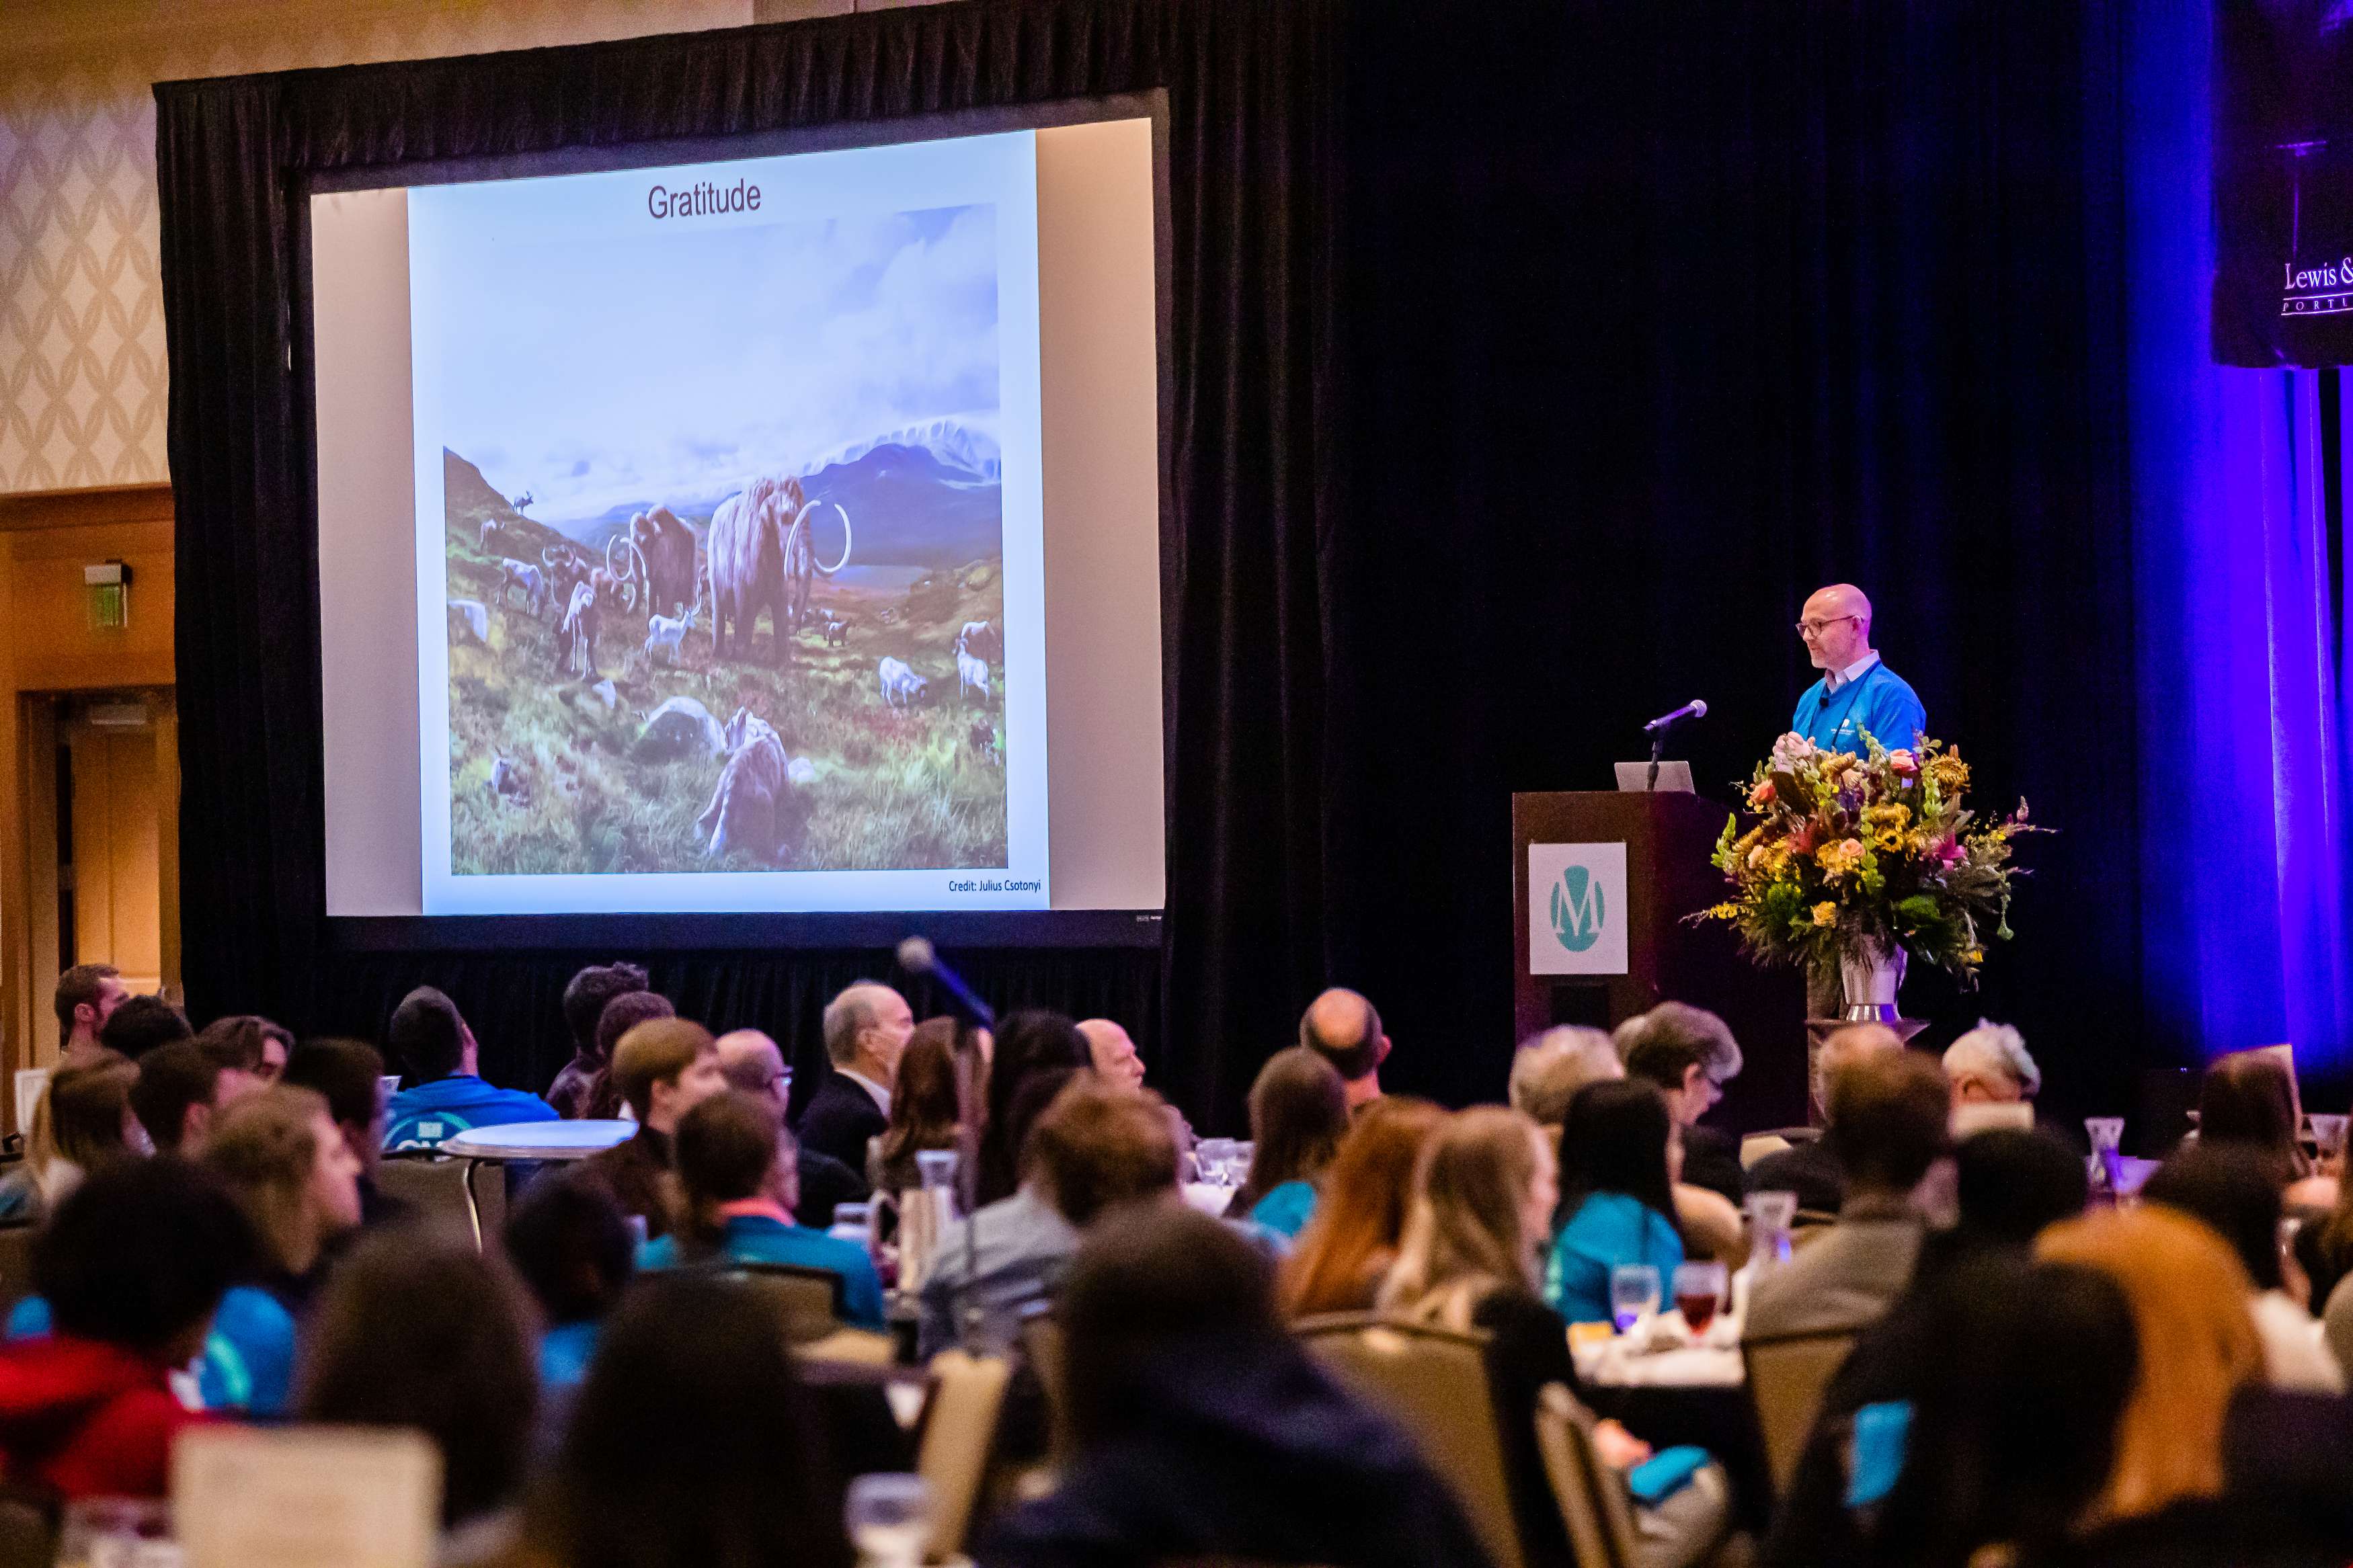 A man wearing a blue shirt presents a lecture at the 2022 MCSR Conference, with a large screen showing a picture of a woolly mammoth.